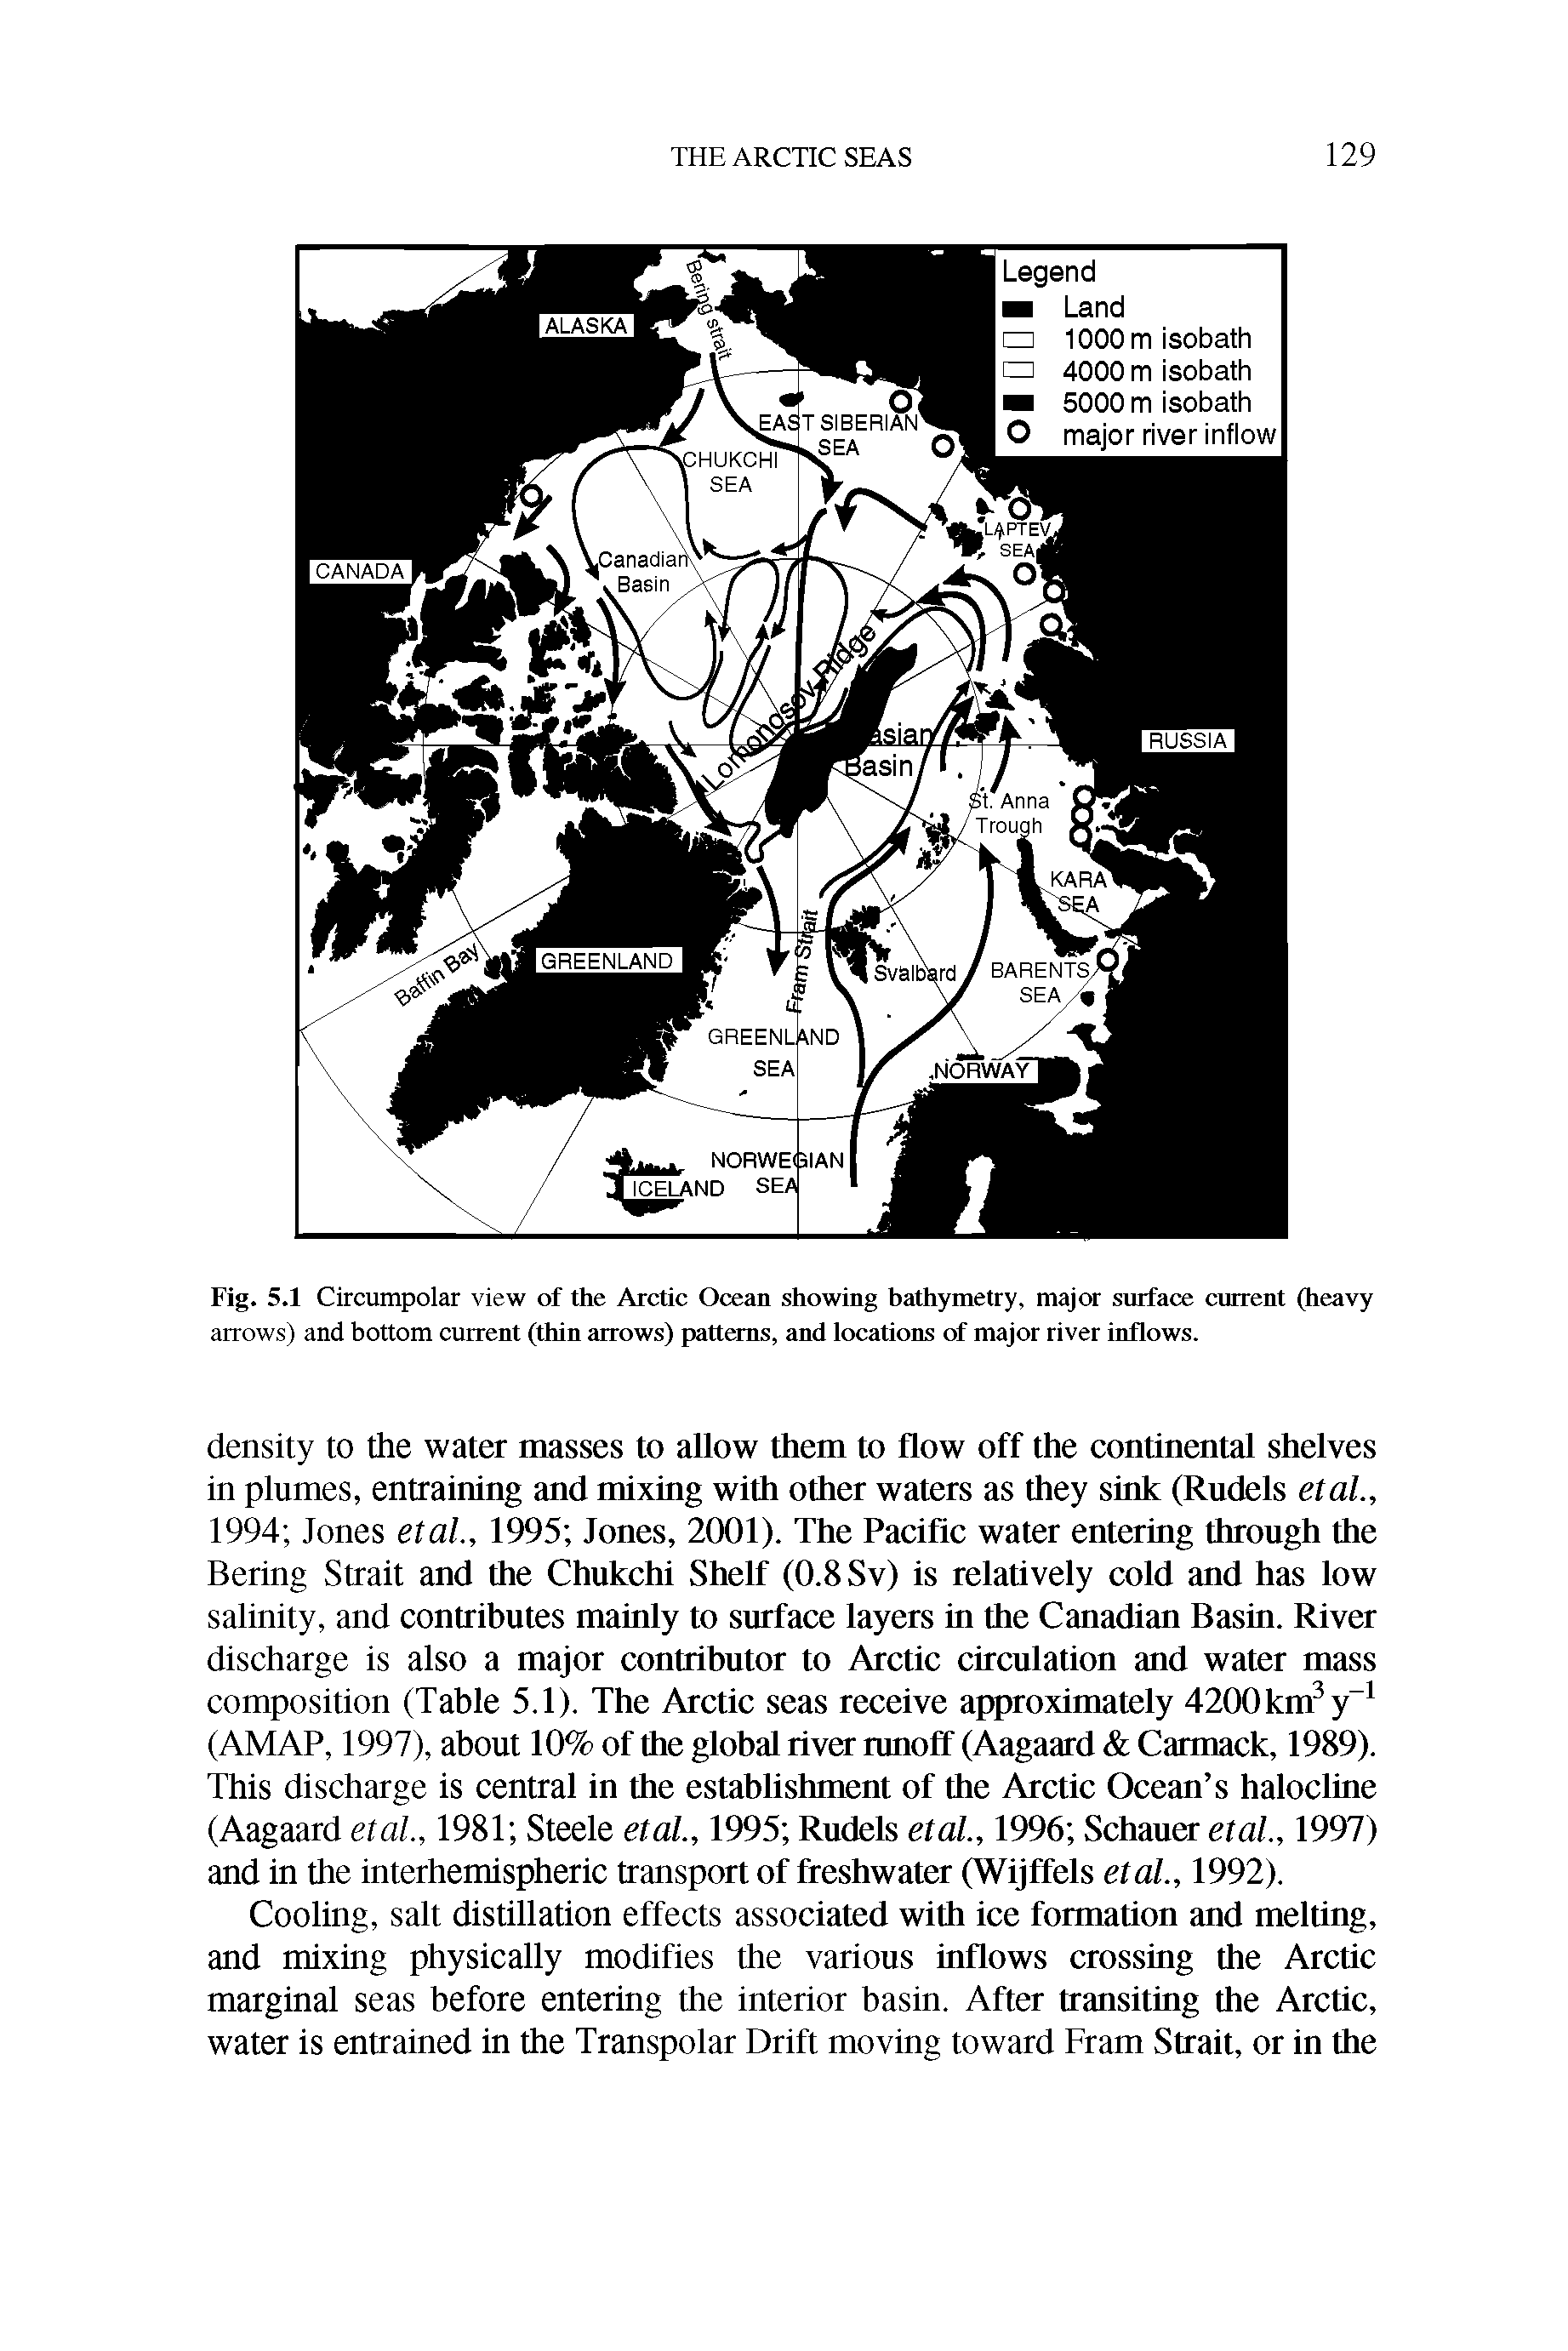 Fig. 5.1 Circumpolar view of the Arctic Ocean showing bathymetry, major surface current (heavy arrows) and bottom current (thin arrows) patterns, and locations of major river inflows.